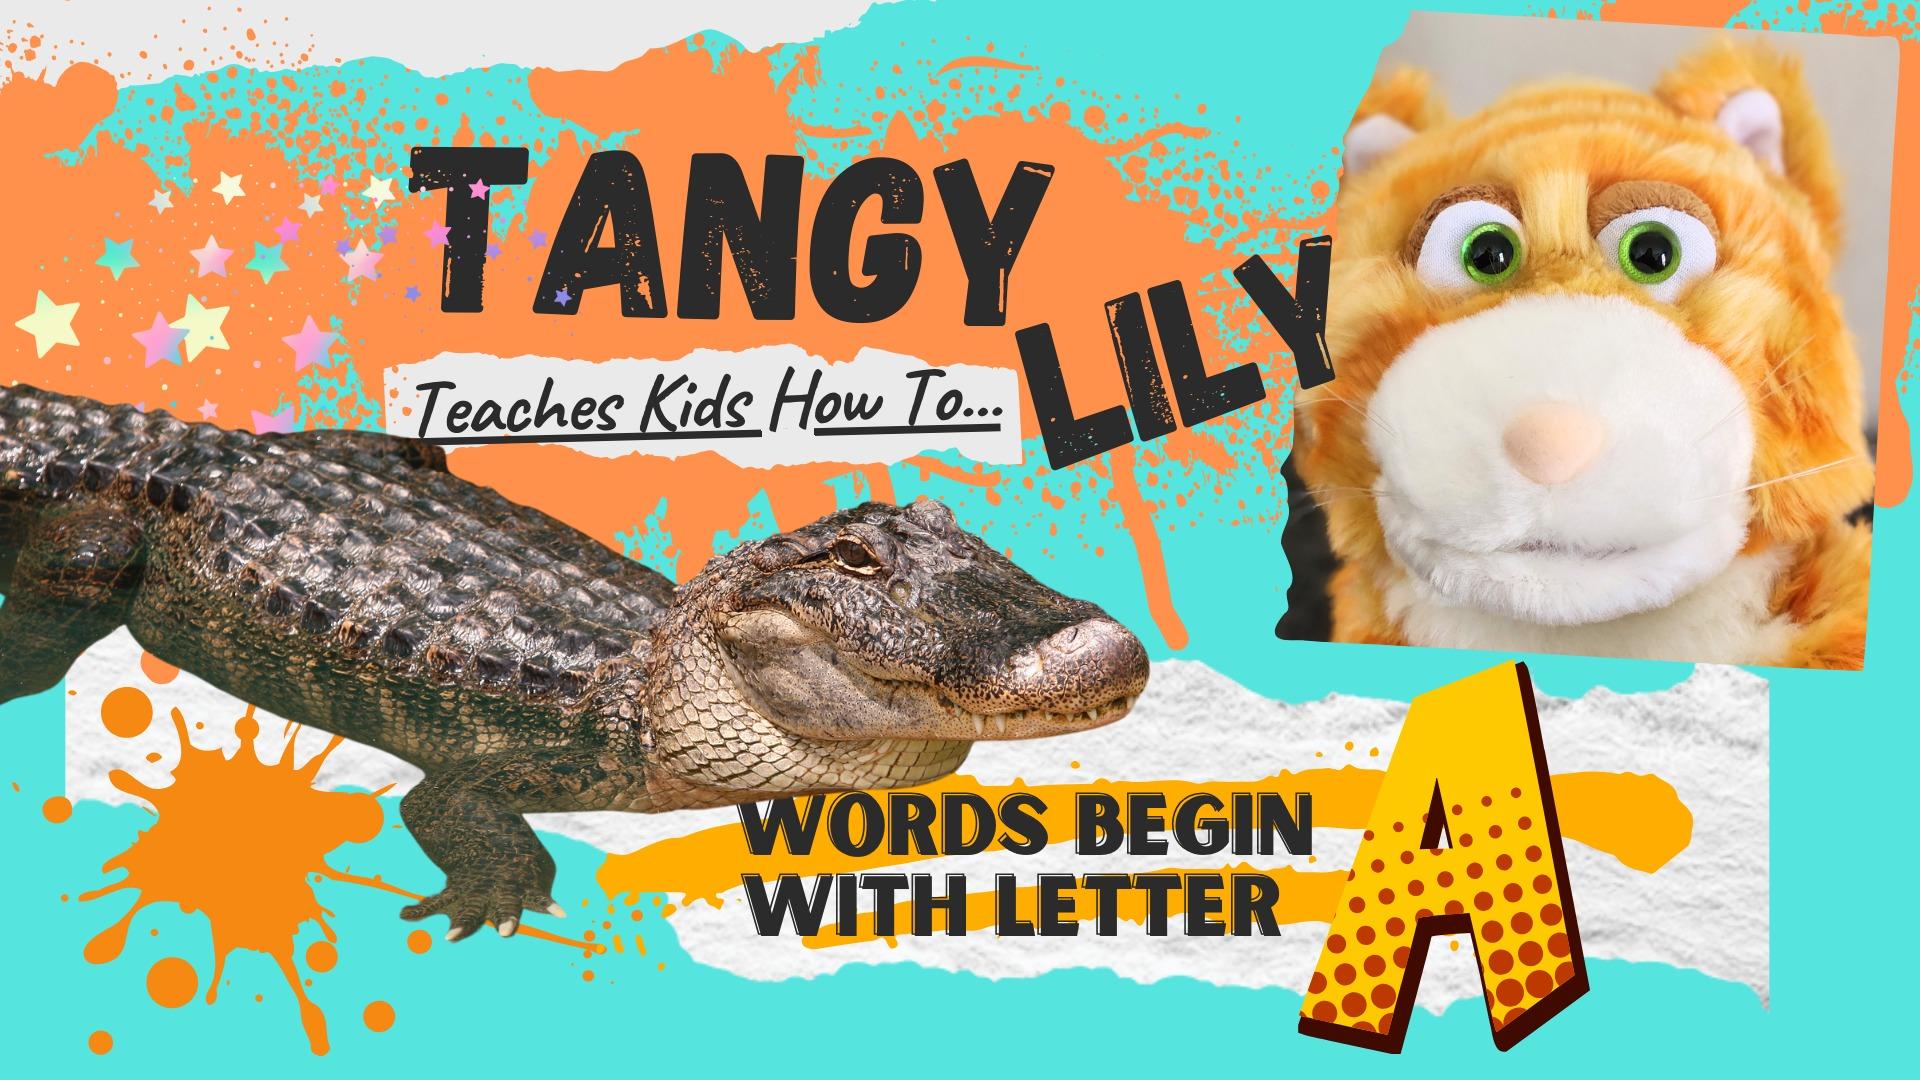 What Words Start With The Letter A? Real Life Animals And Objects